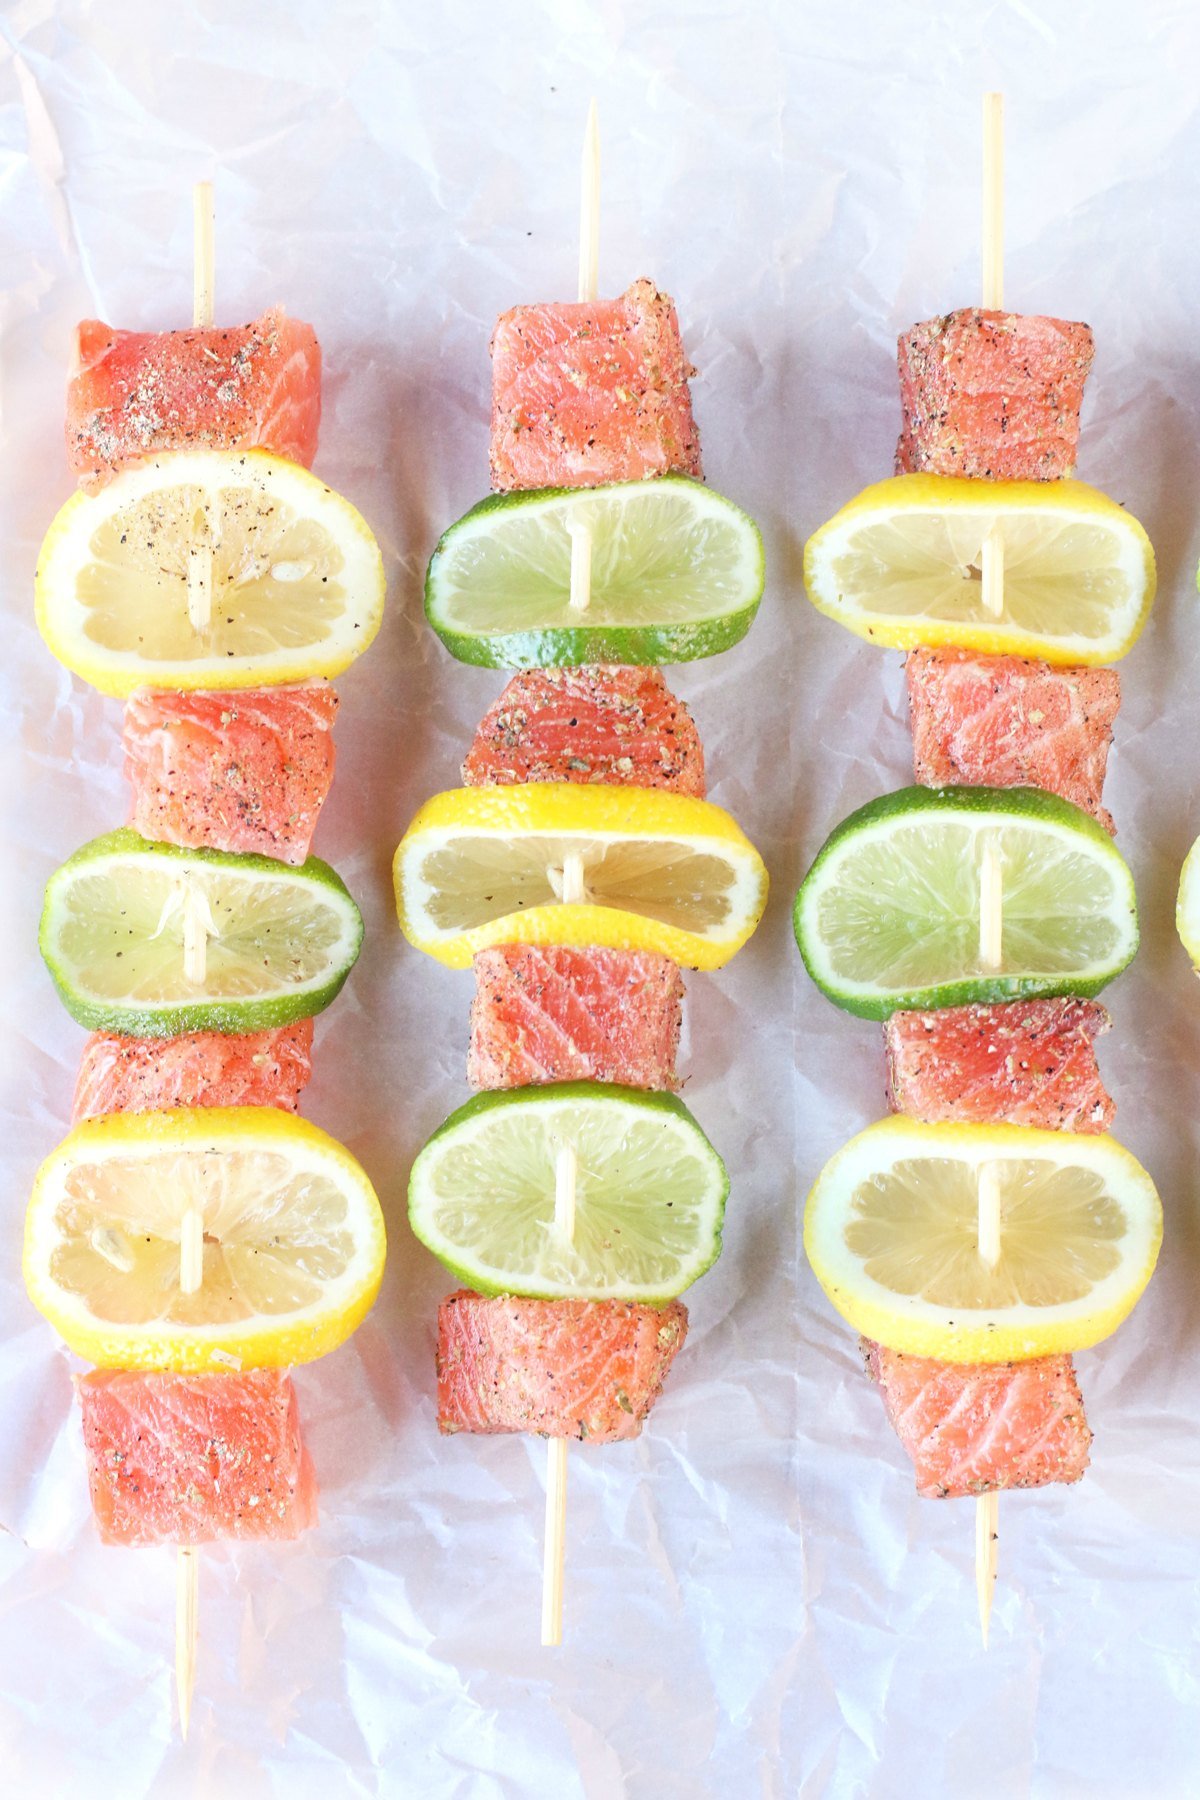 Fresh salmon skewers with lemon and lime laying on a lined pan ready to grill